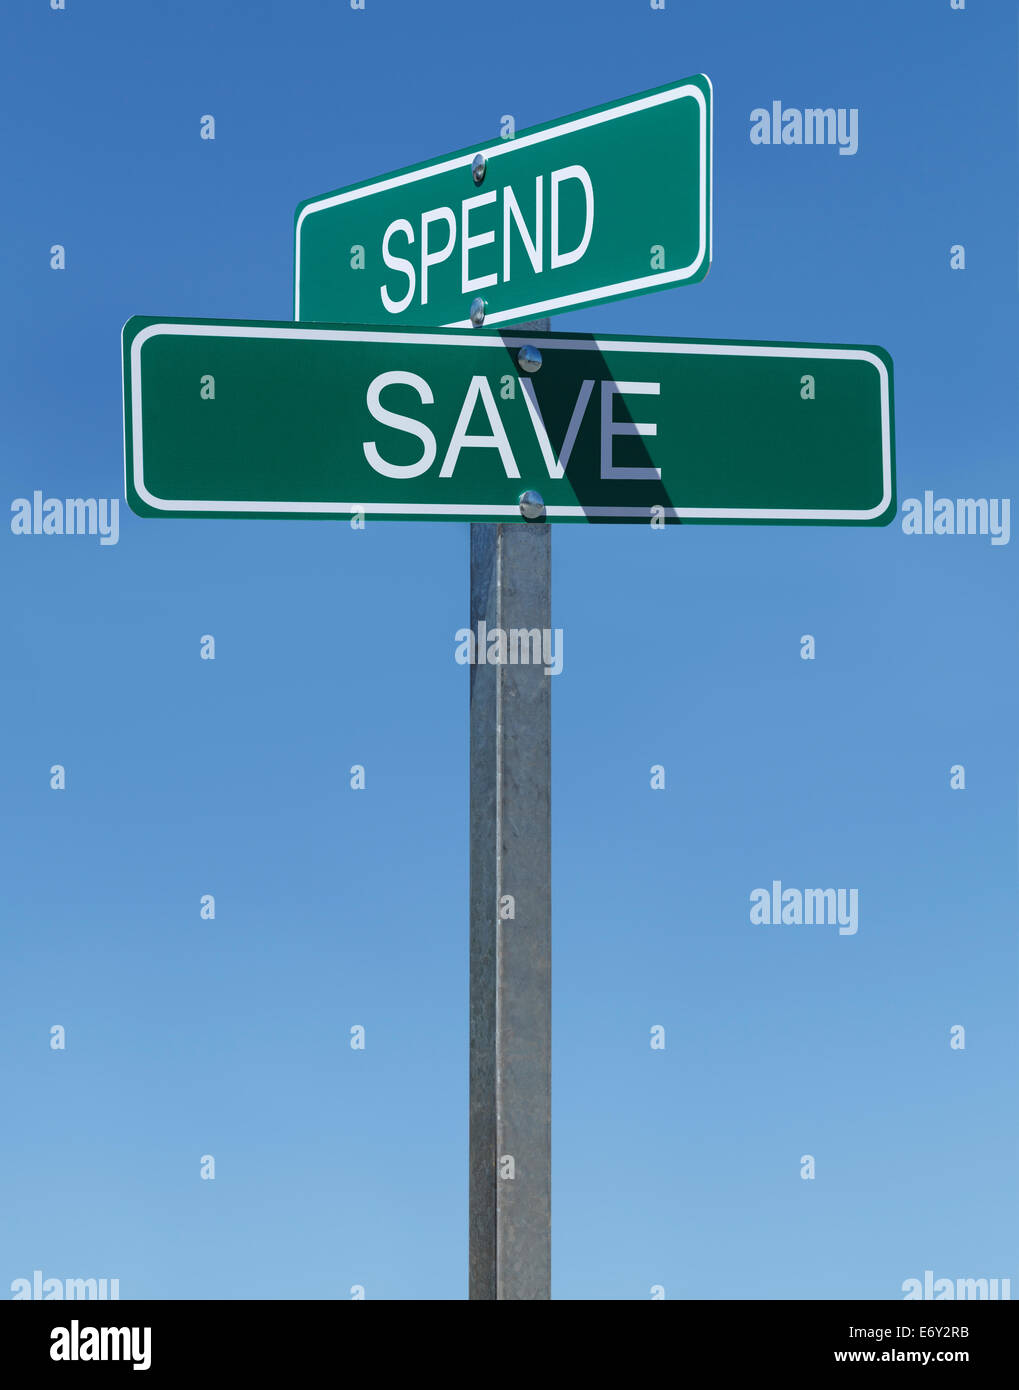 Two Green Street Signs Spend and Save on Metal Pole with Blue Sky Background. Stock Photo